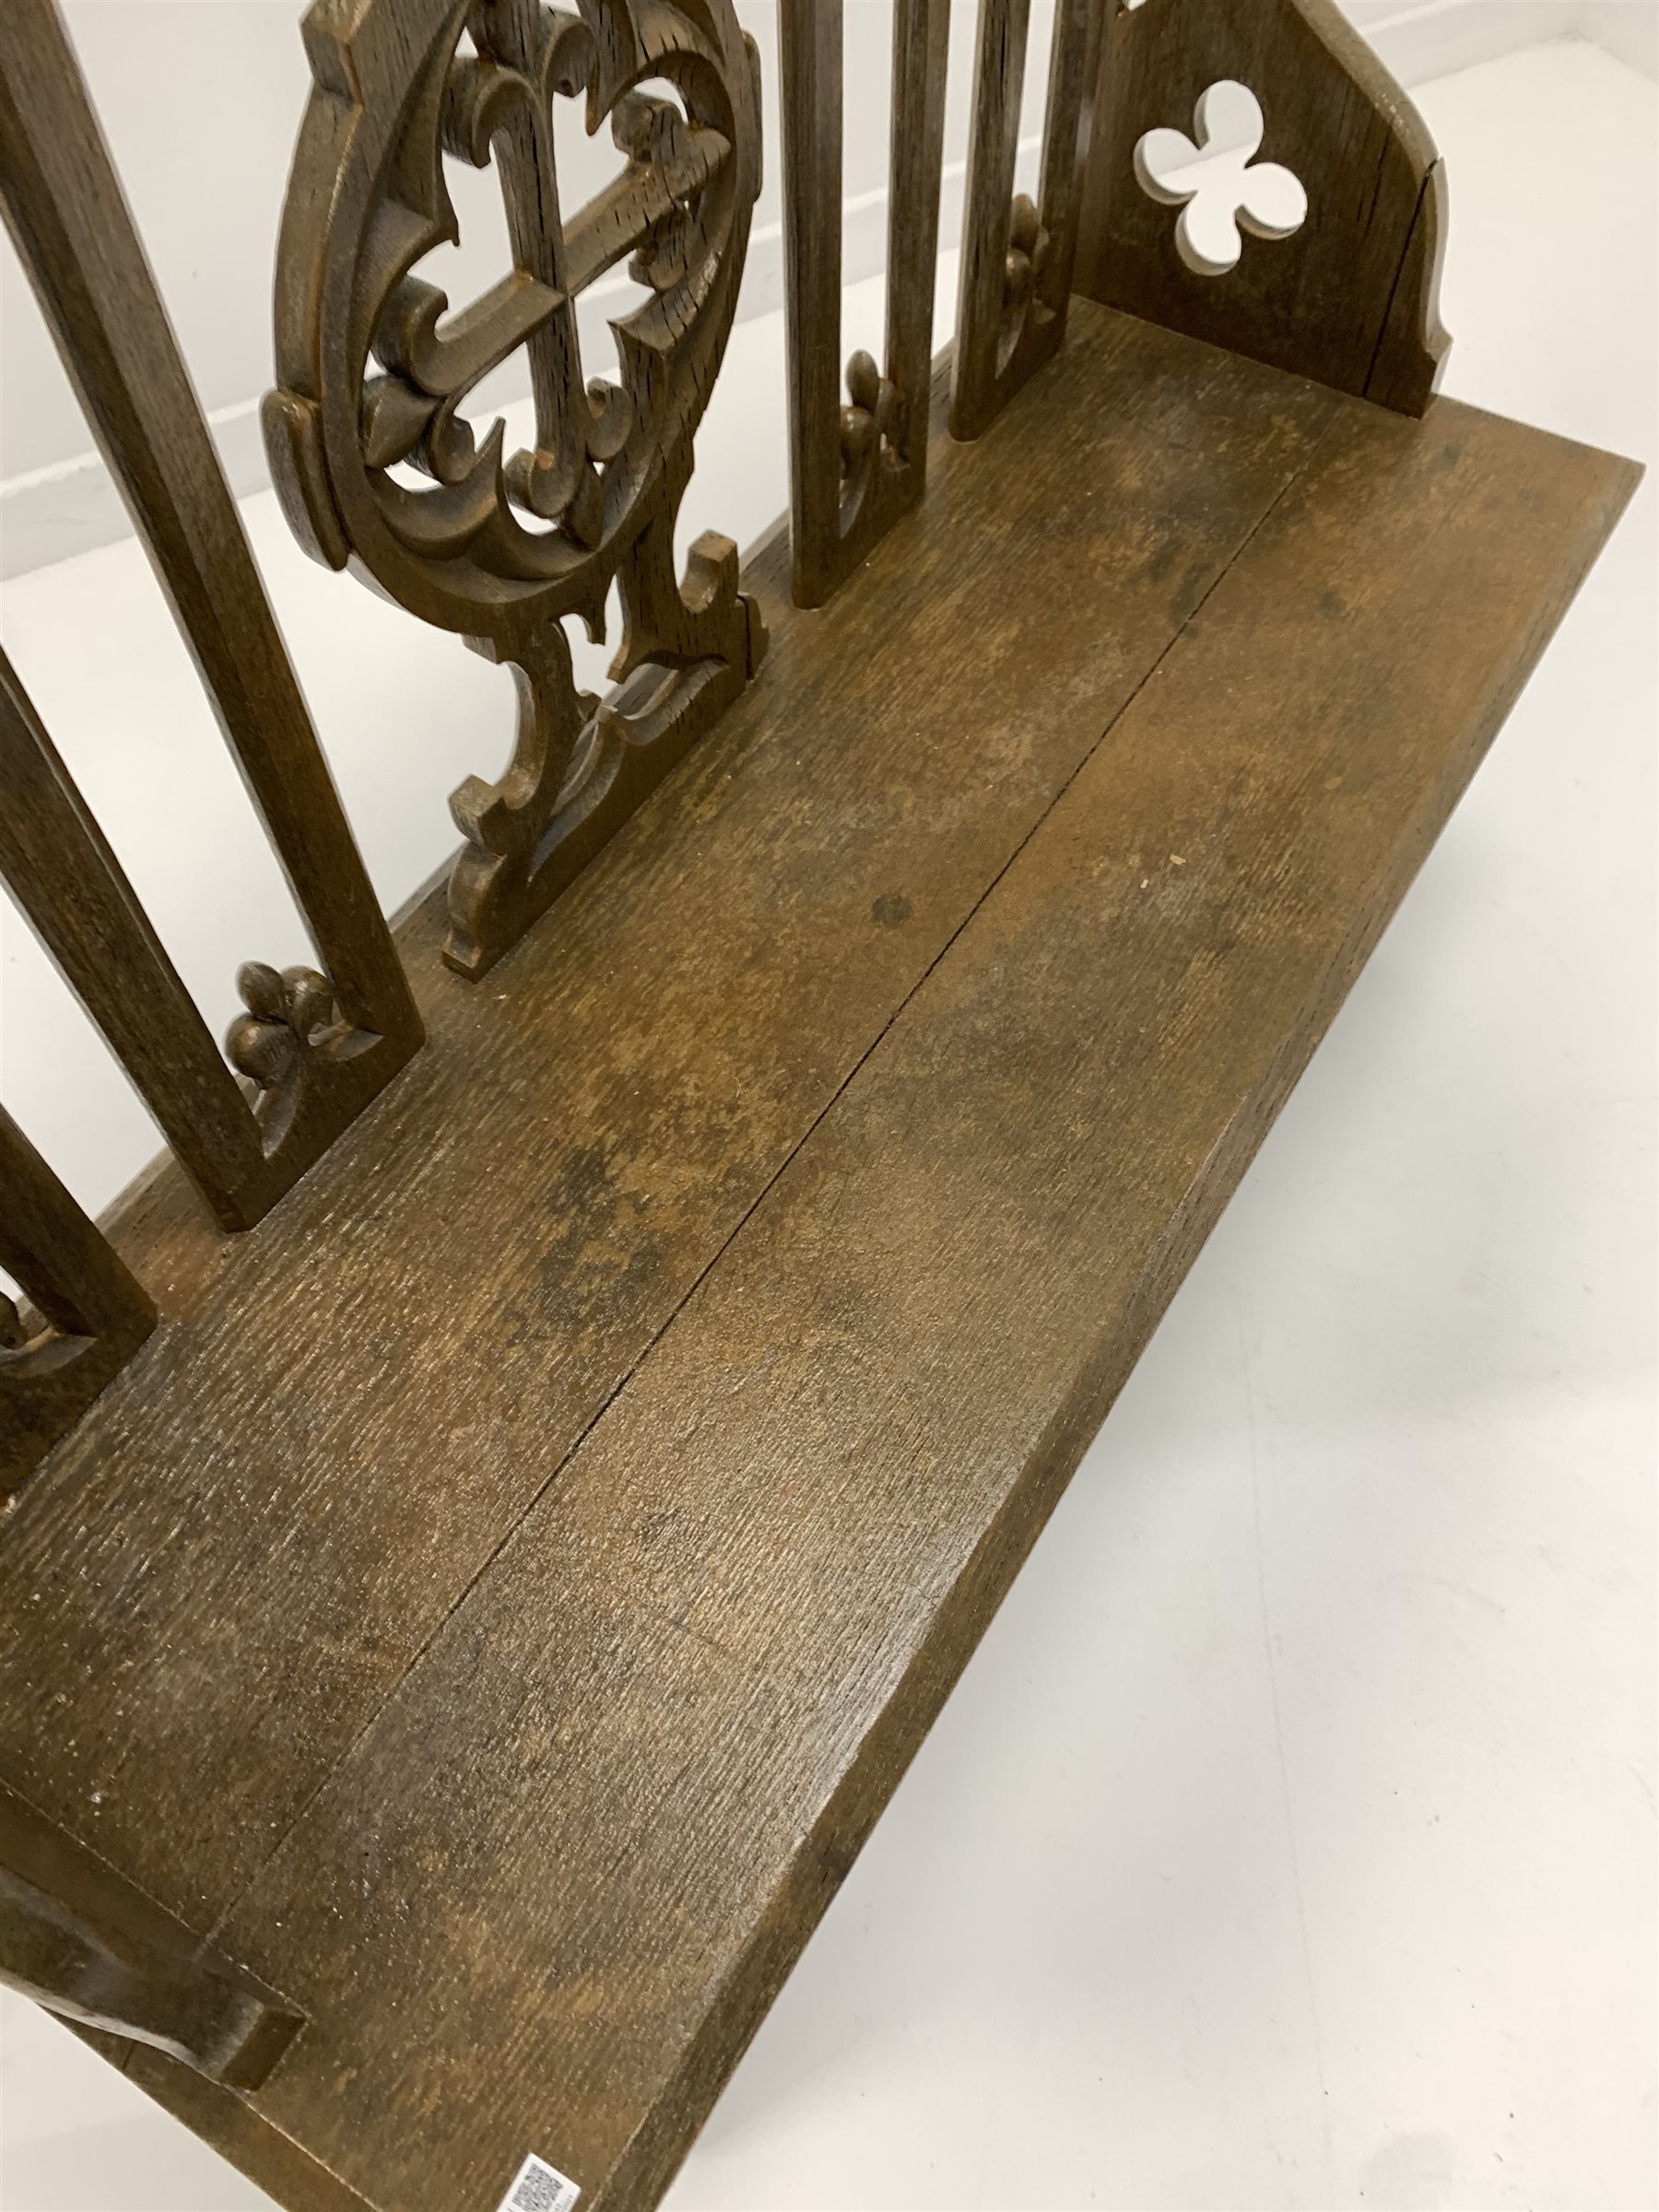 19th century oak hall bench of Gothic design, with arched splats carved with fleur de lis, chamfered - Image 4 of 5